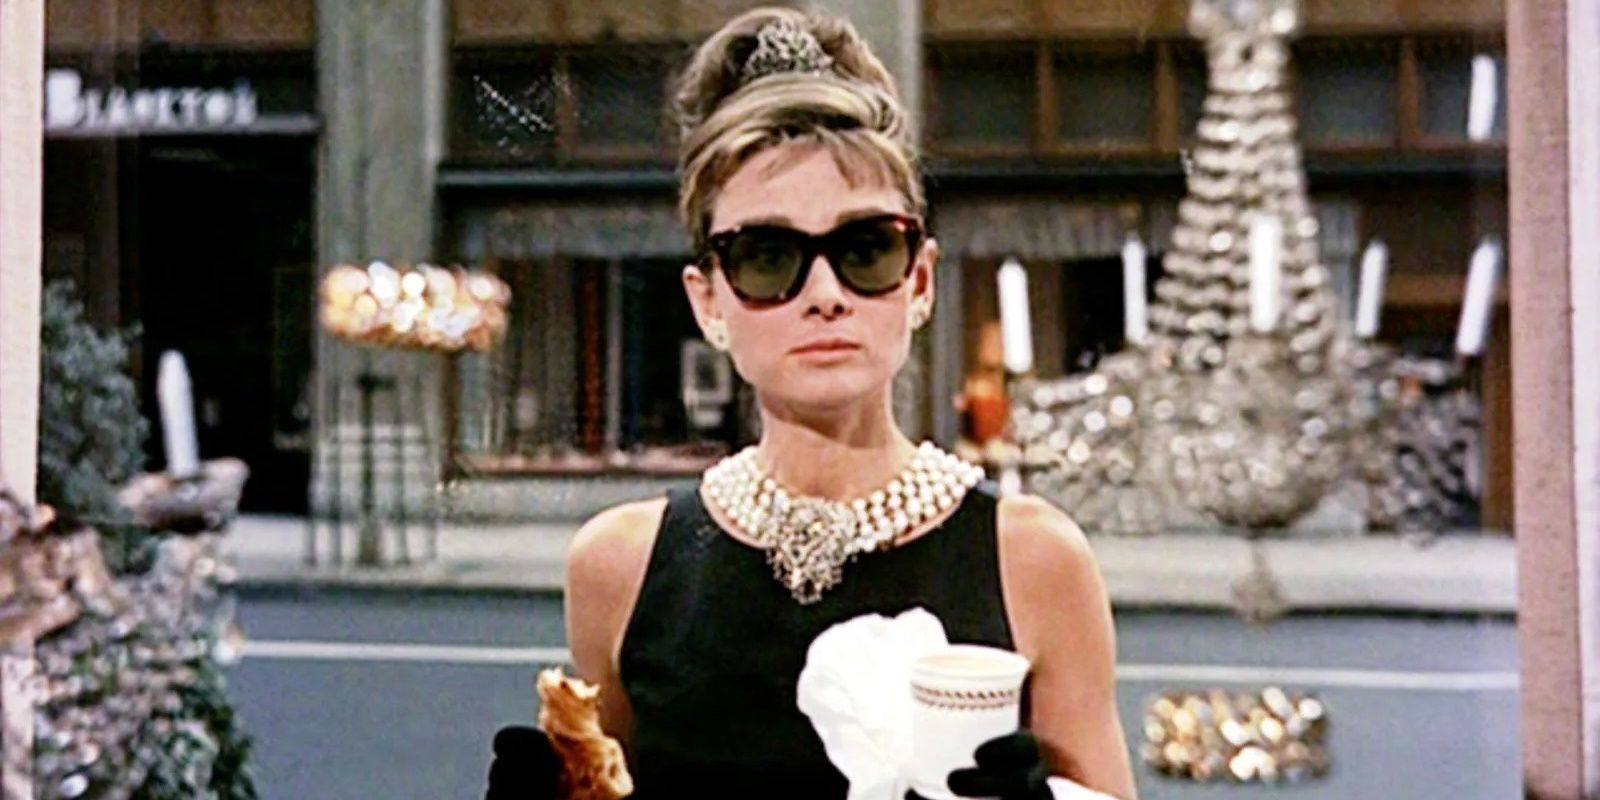 Holly eating a bagel in front of Tiffany's in Breakfast at Tiffany's.